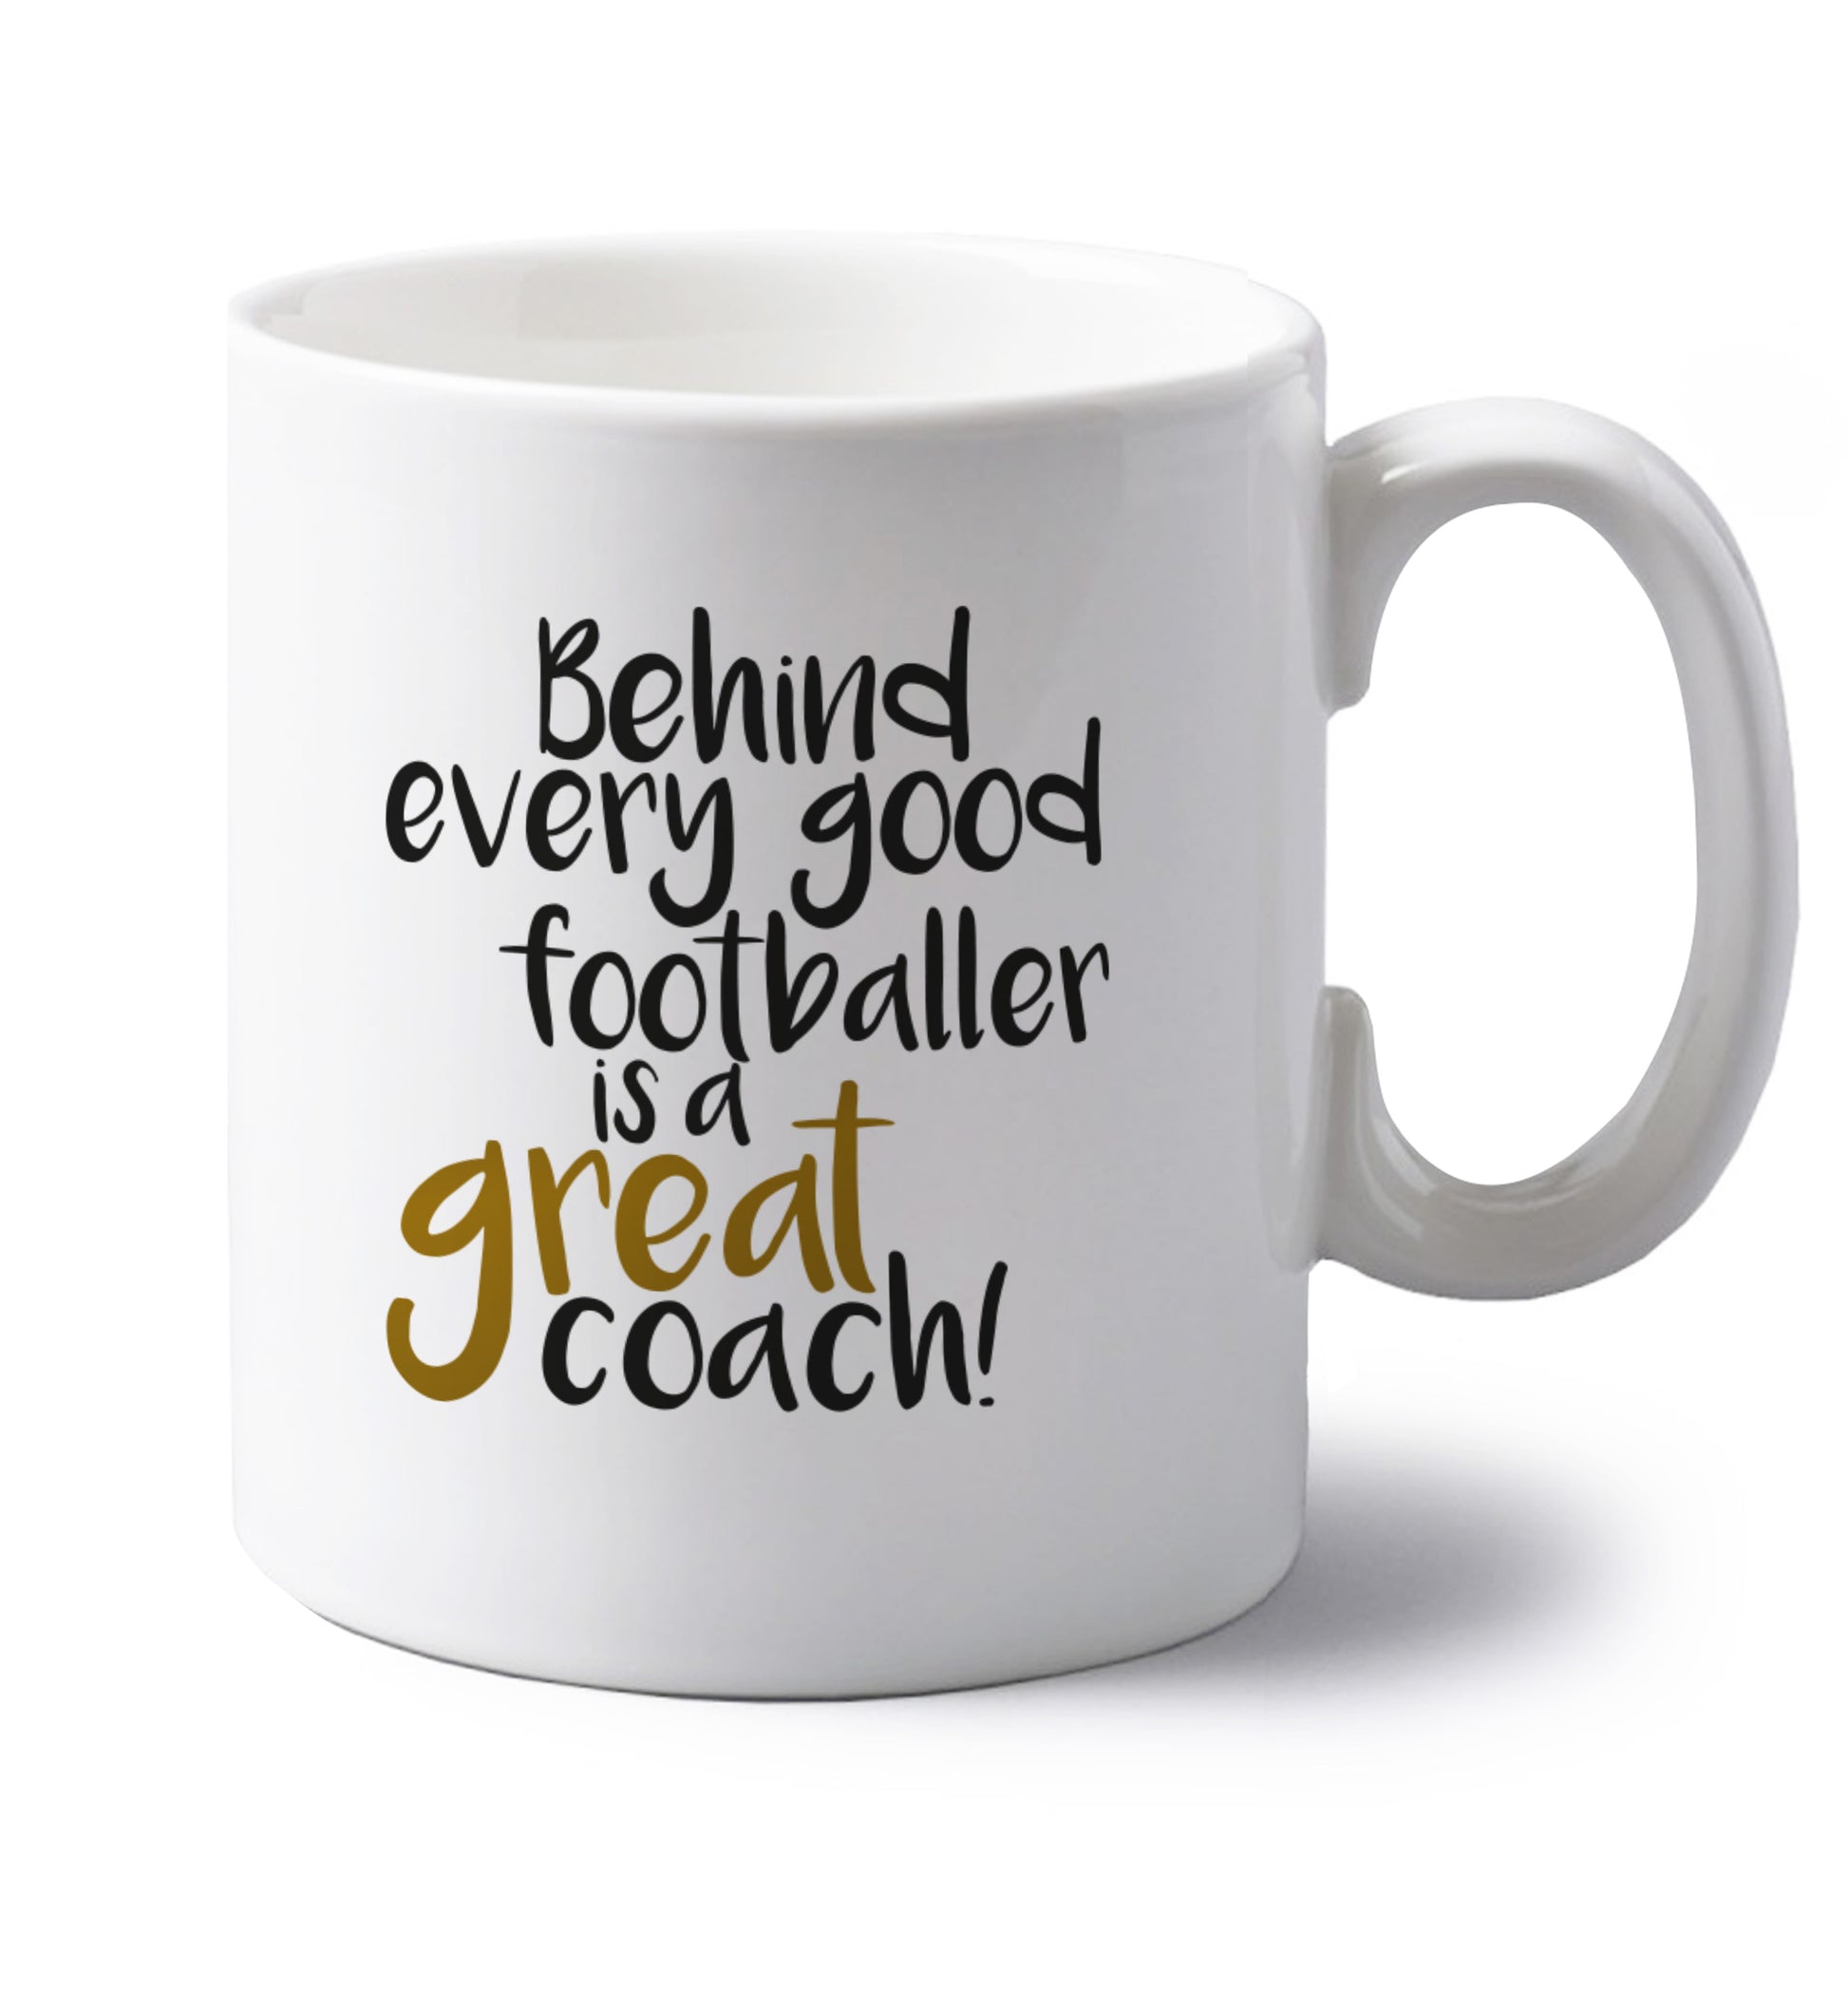 Behind every good footballer is a great coach! left handed white ceramic mug 